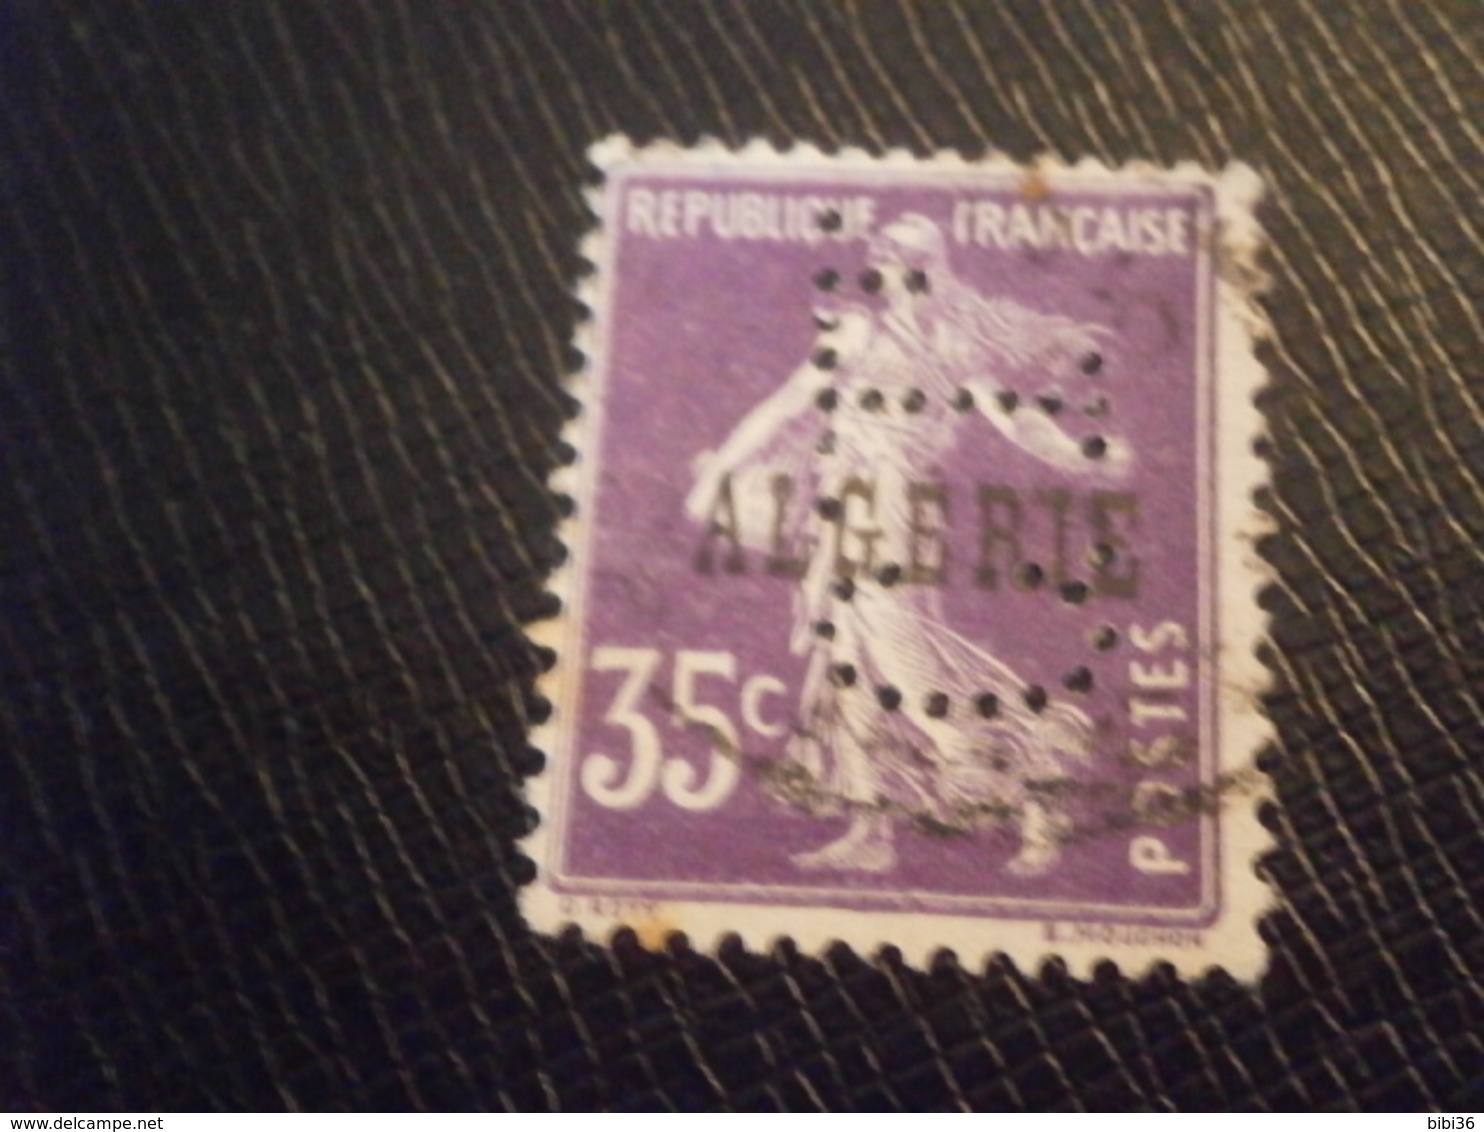 ALGERIE ALGERIA TIMBRE 18 SEMEUSE CL13 PERFORE PERFORES PERFIN PERFINS PERFORATION LOCHUNG PERCE PERFORATI PERFO - Oblitérés